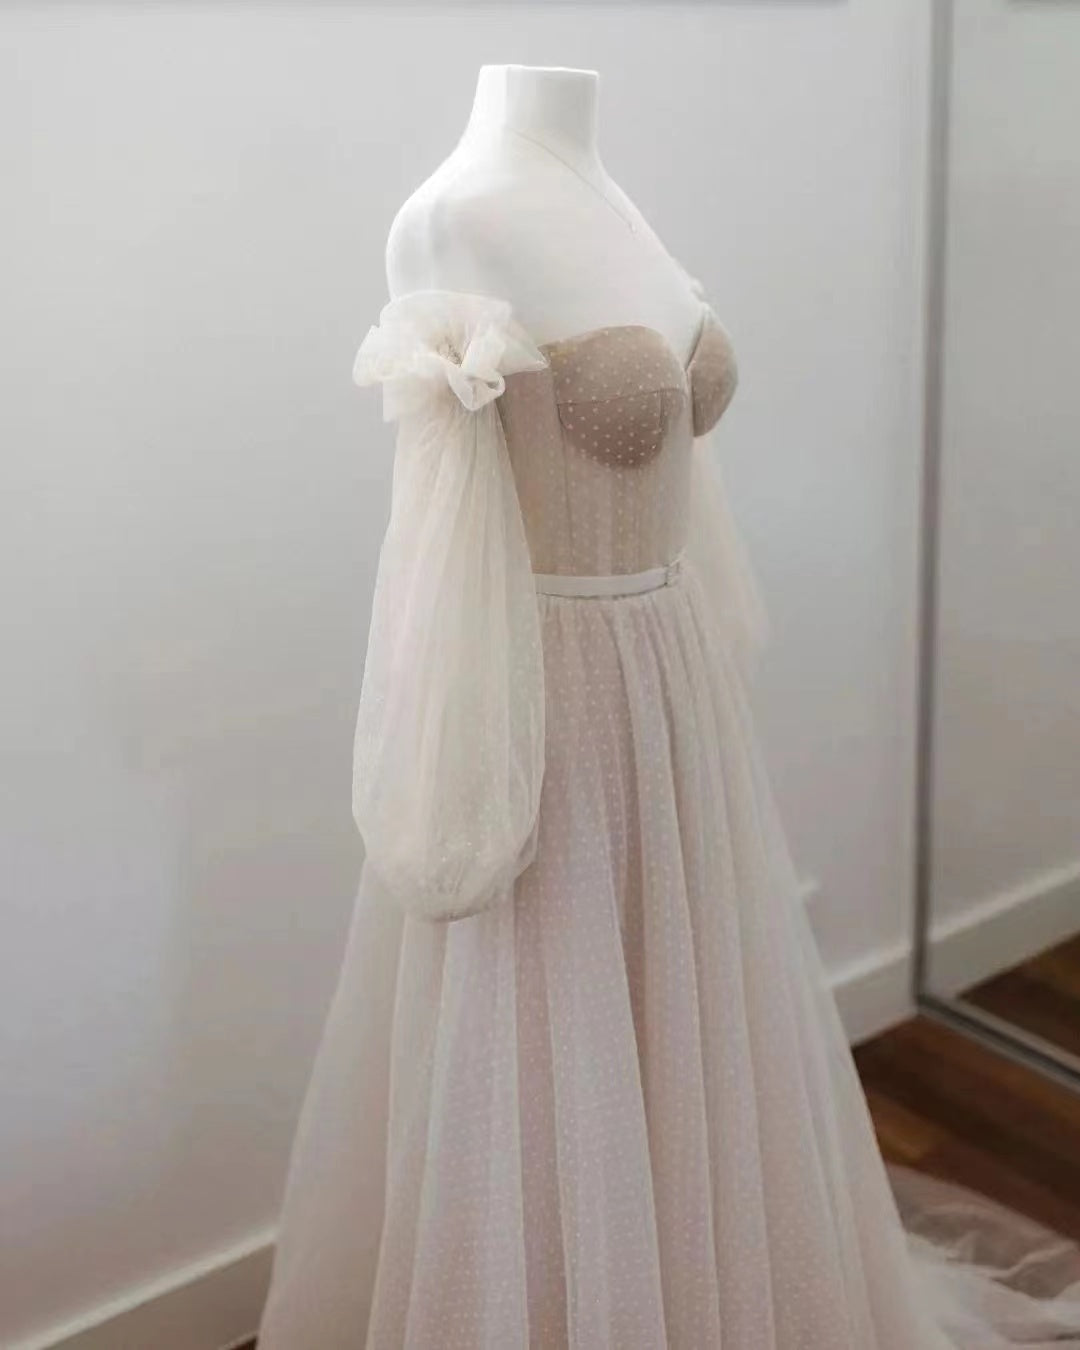 A-line Lovely Wedding Dresses, Sweetheart Bridal Gowns, Long Sleeves Corset Newest Wedding Dresses